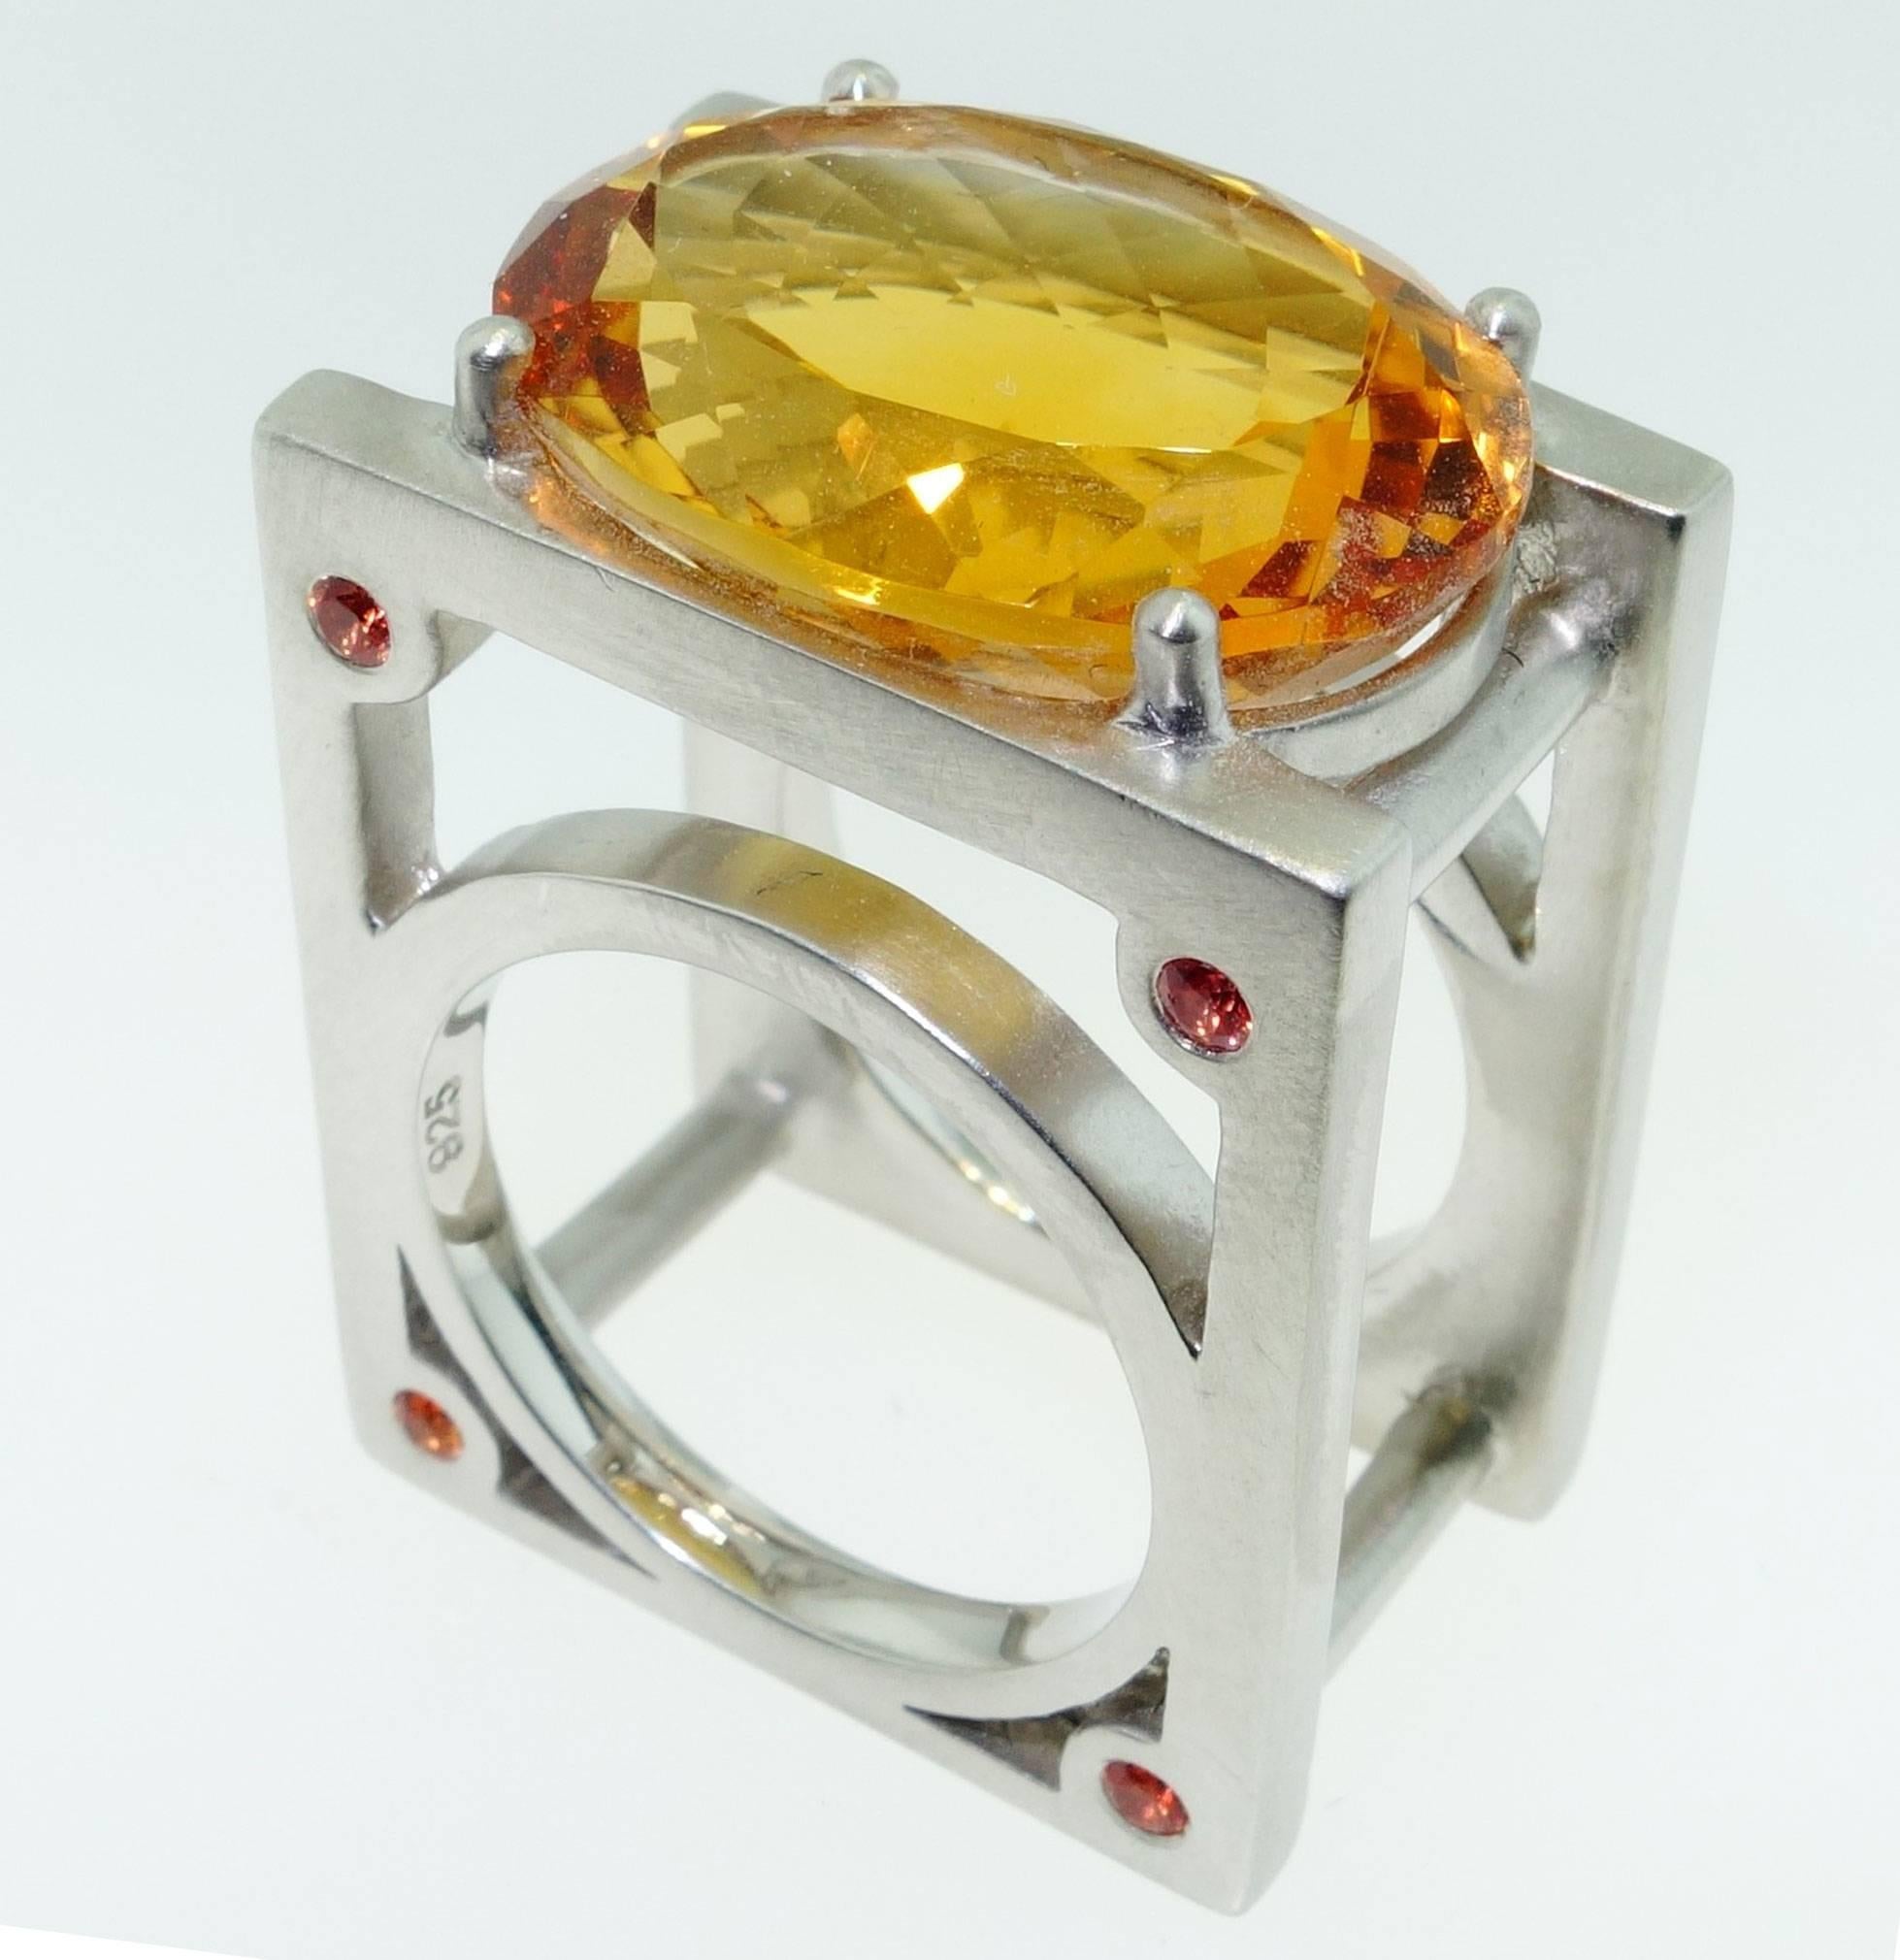 Sensational Citrine Ring set with a large 18 Carat oval facet-cut Citrine and 8 'rivets' set with small orange sapphires, in a unique Industrial style Sterling Silver Rhodium Tarnish-resistant mounting. More fabulous in person and so comfortable to